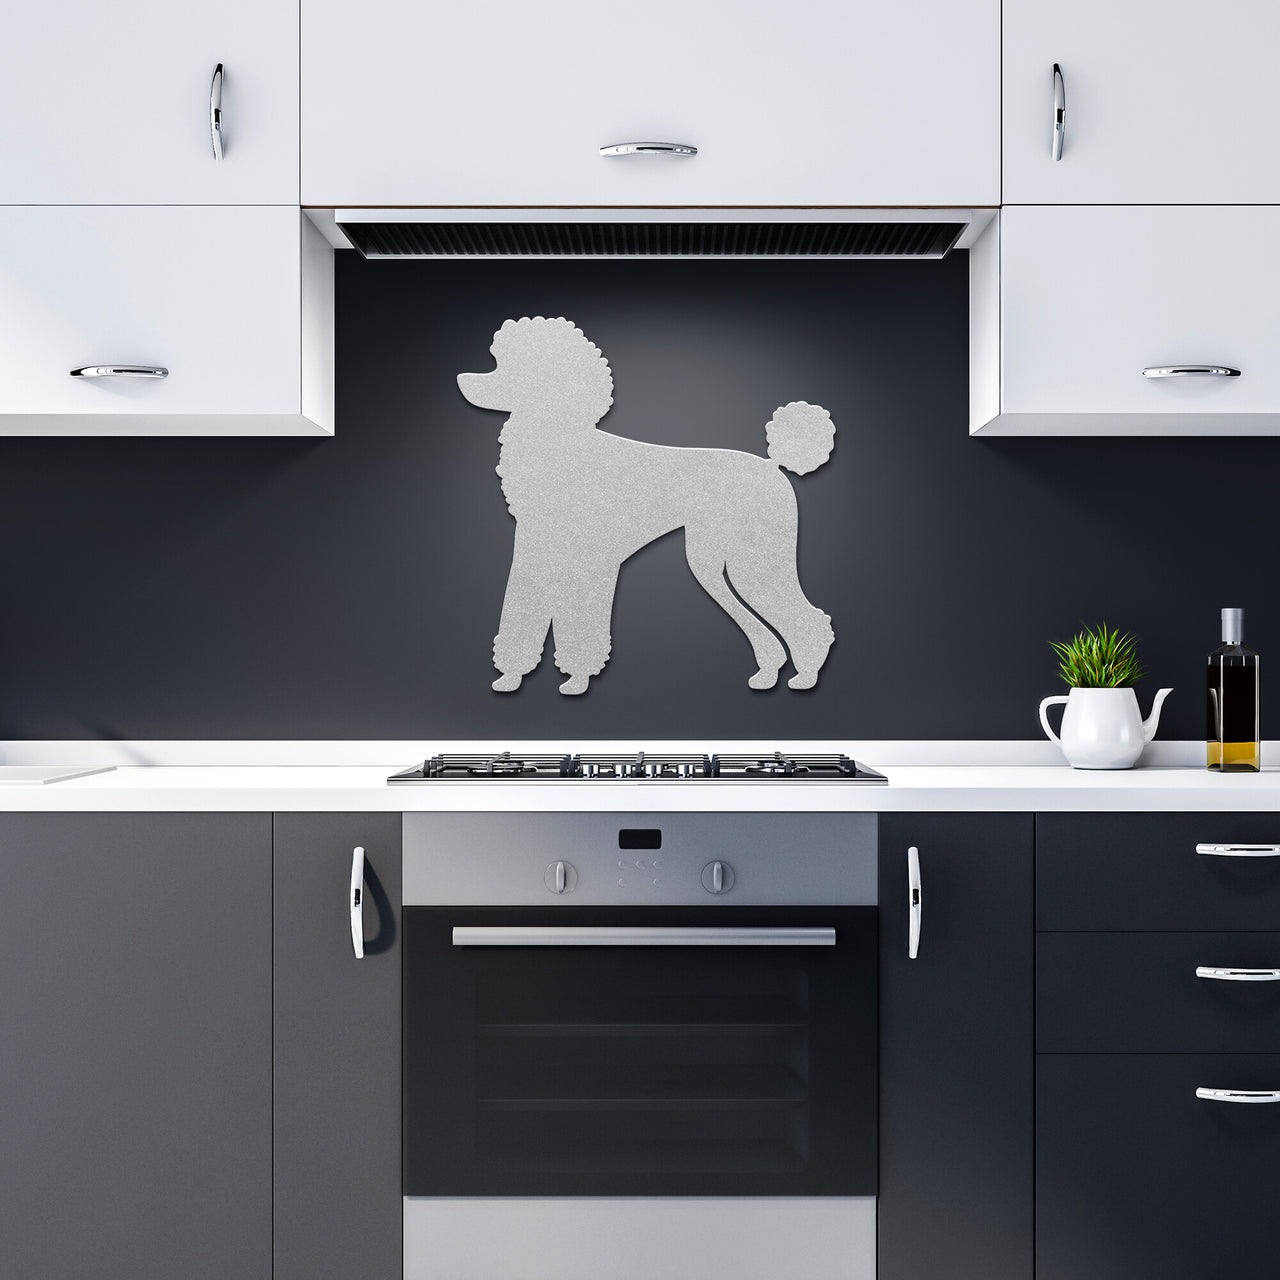 Poodle-Silhouette 2110-1